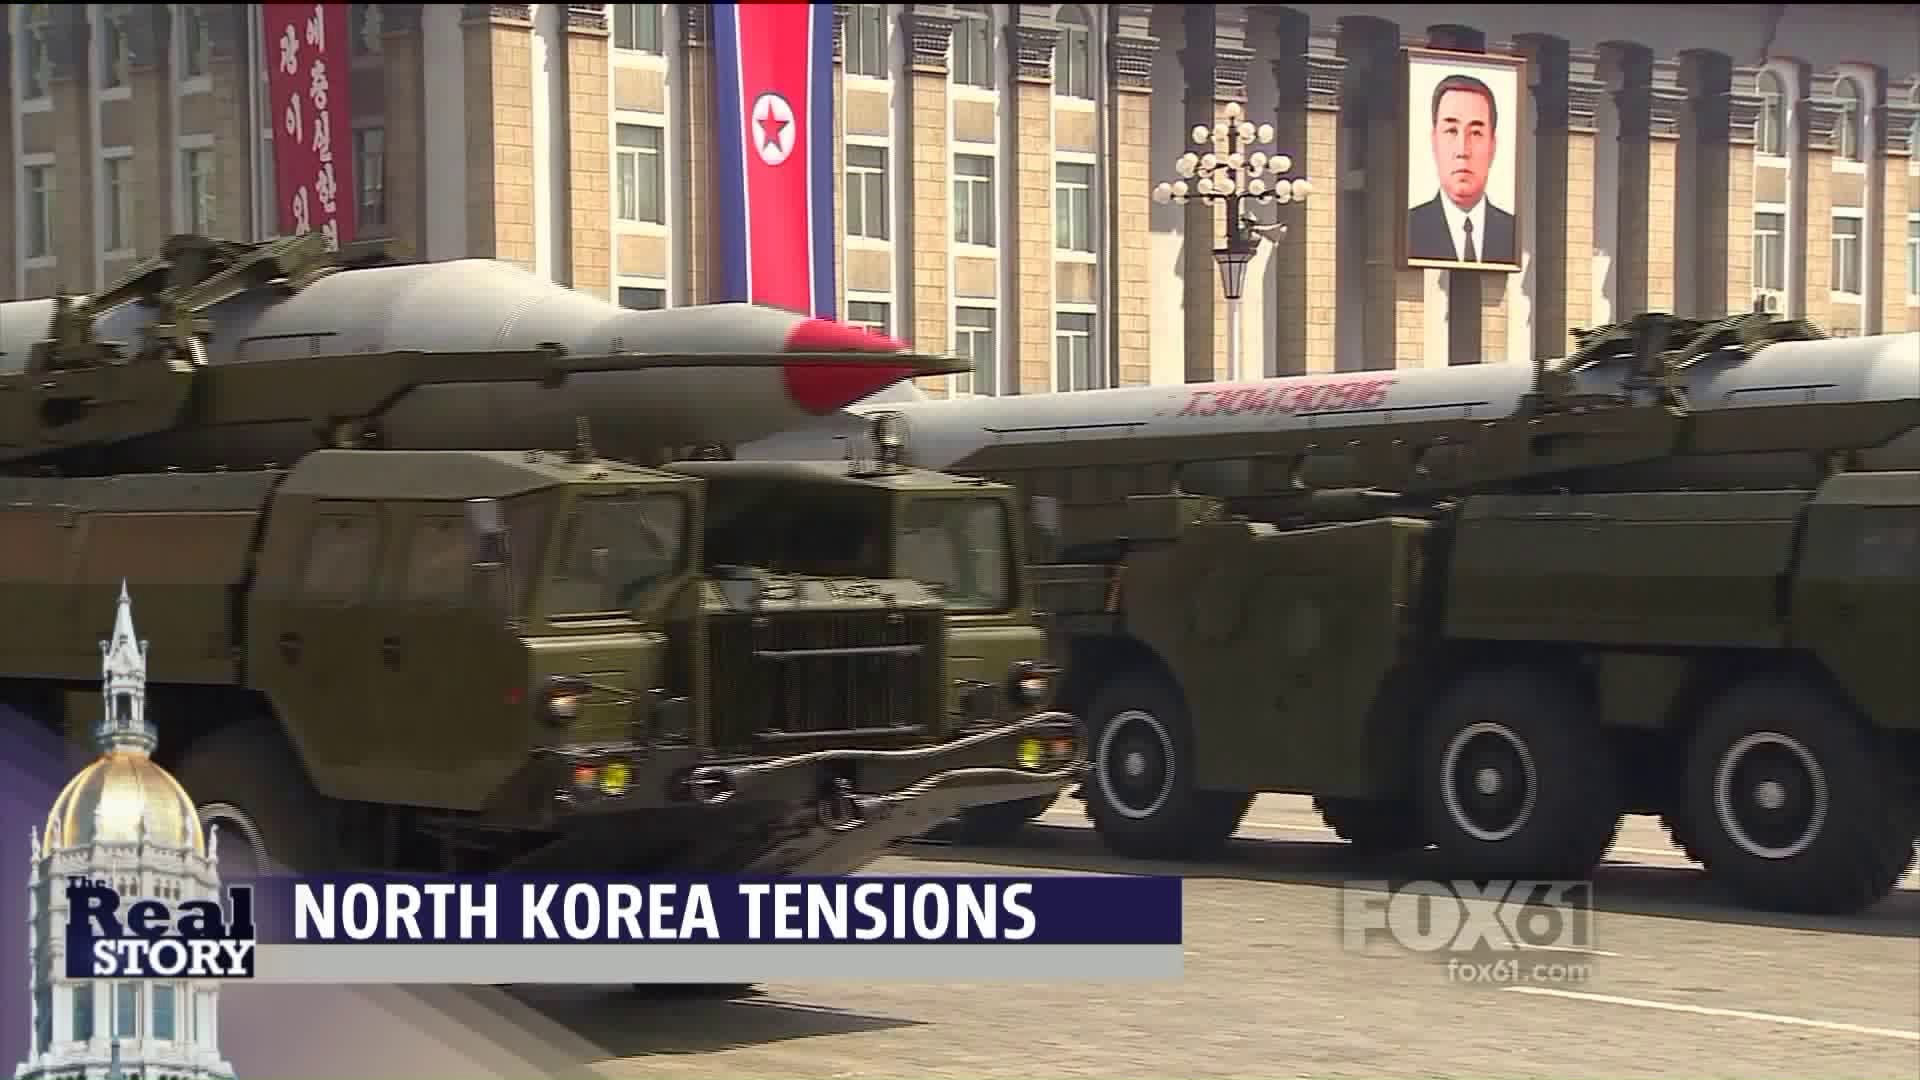 The Real Story: North Korea tensions